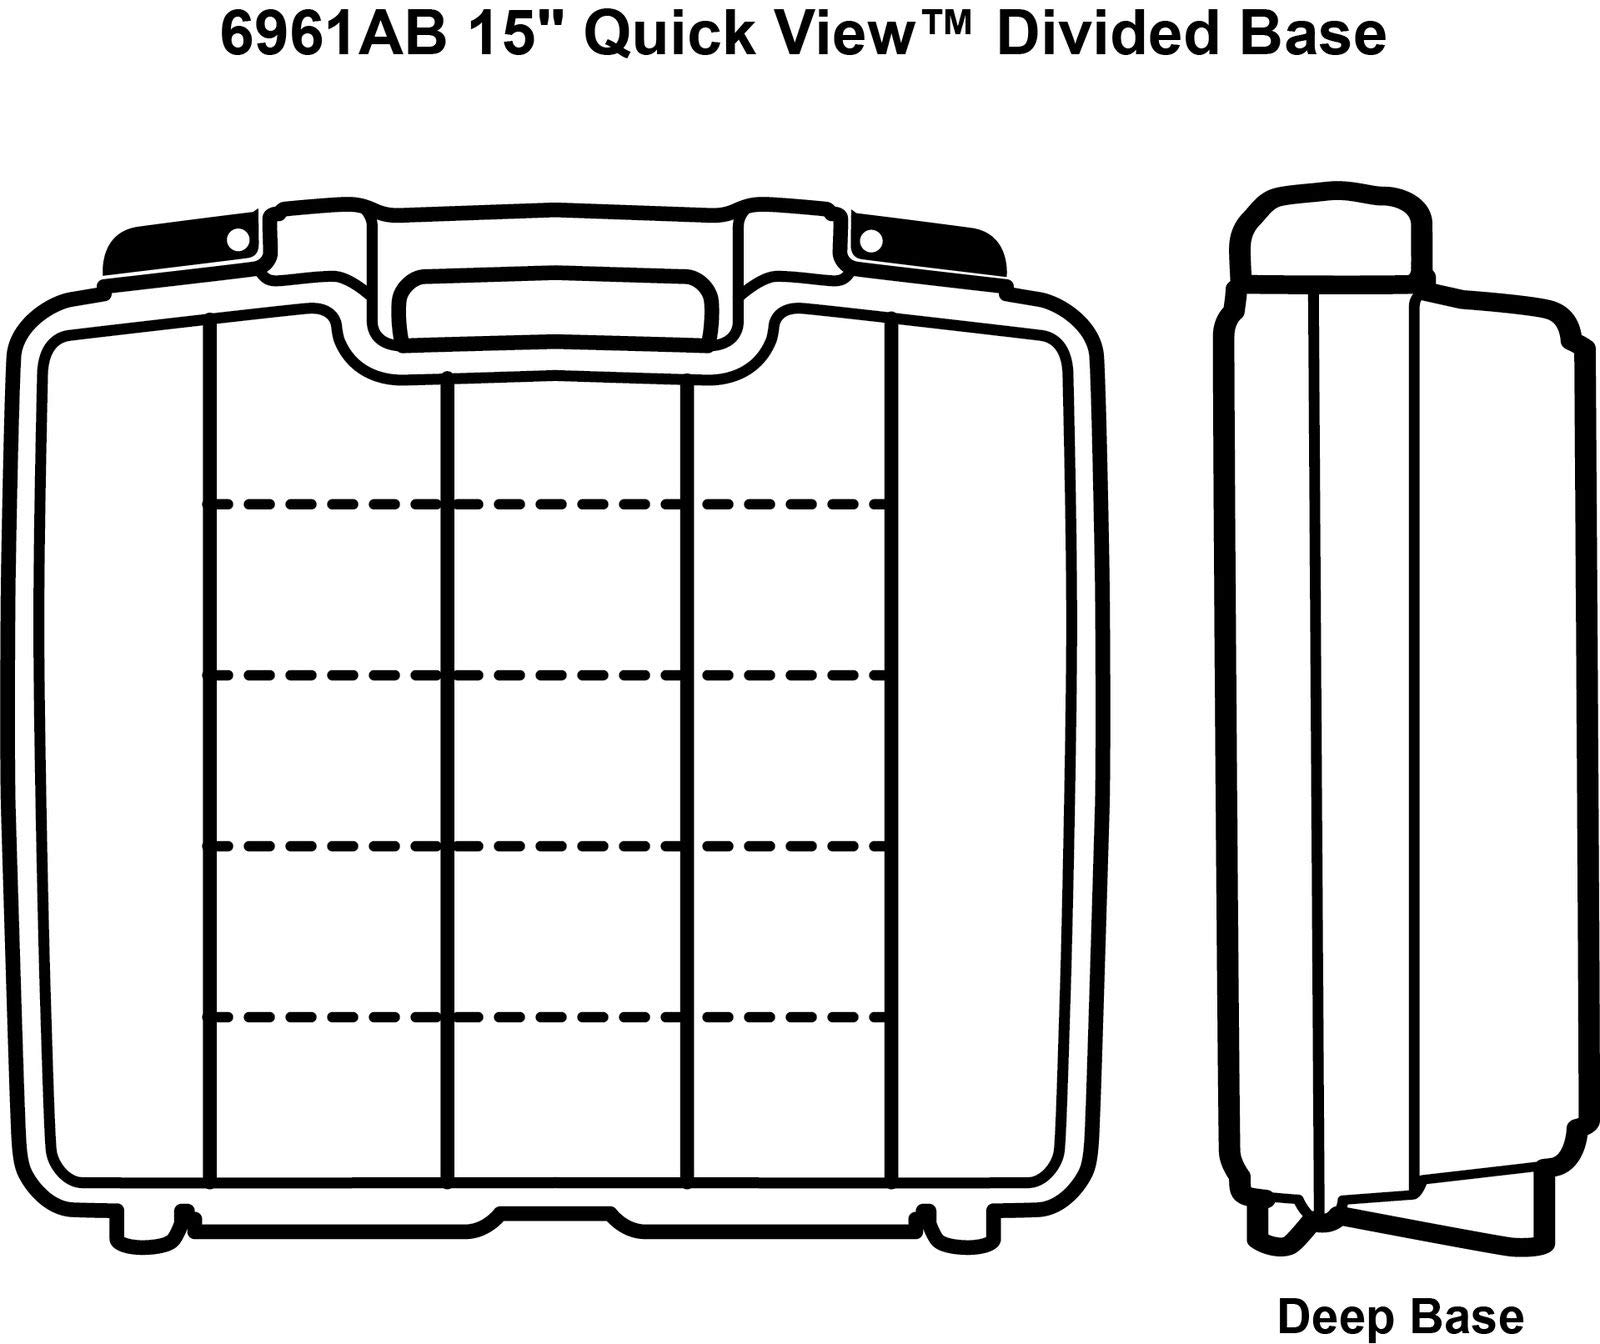 ArtBin 6961AB Quick View Deep Base Carrying Case with Removable Dividers, Portable Art & Craft Storage Box, 15